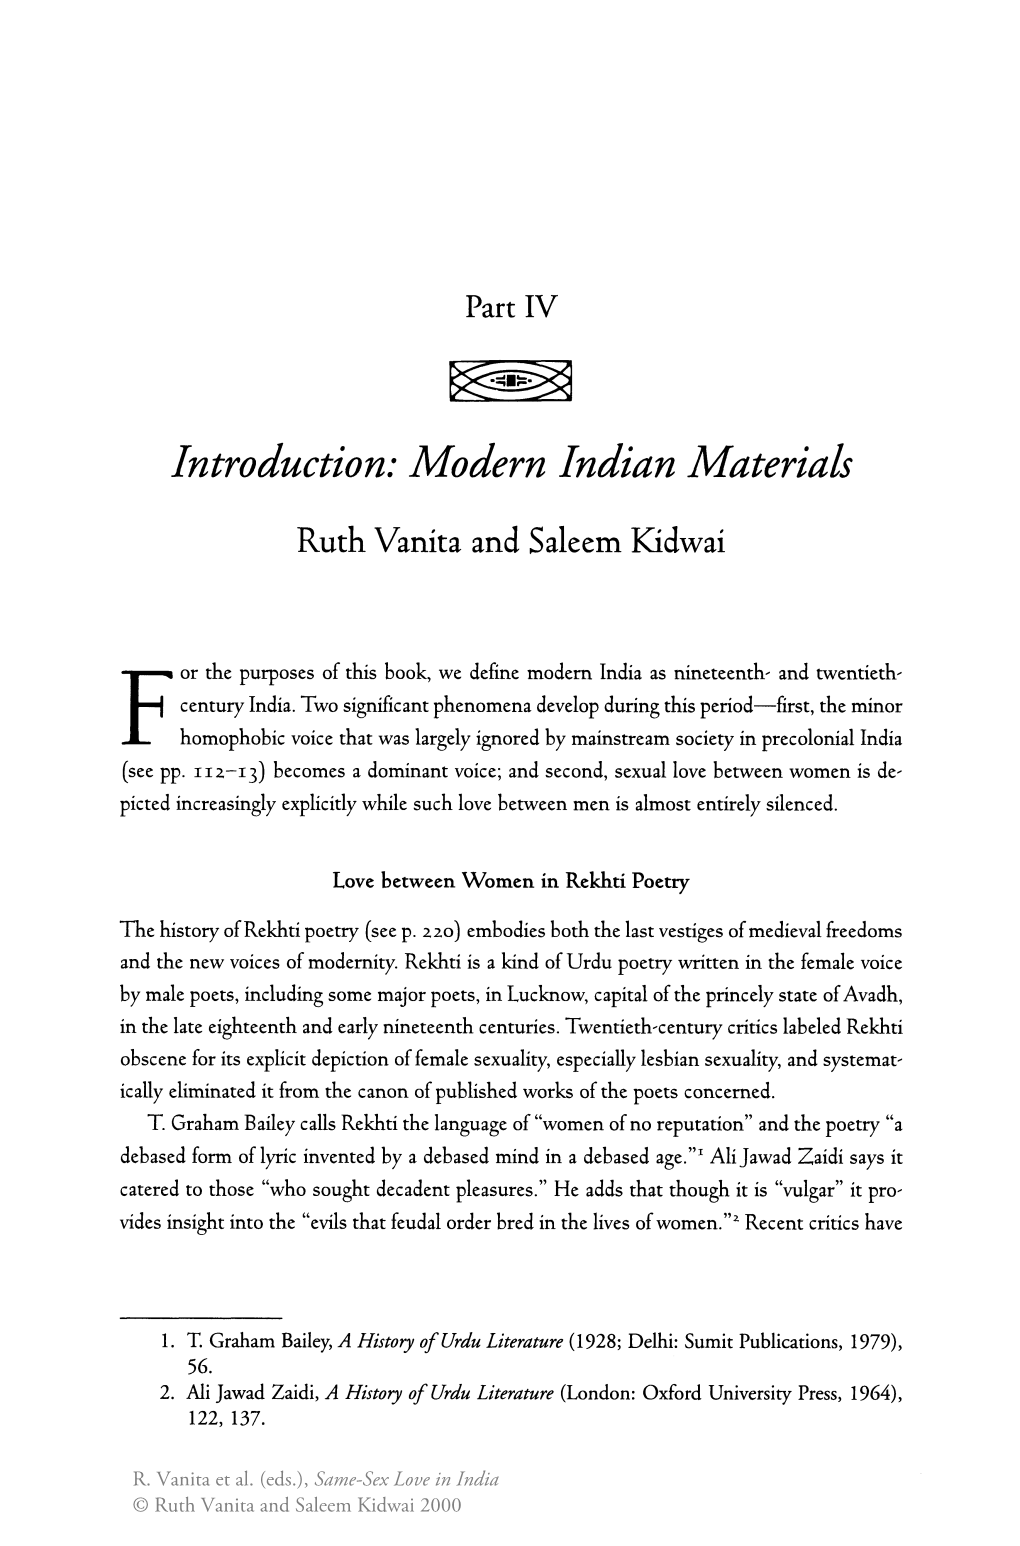 Introduction: Modern Indian Materials